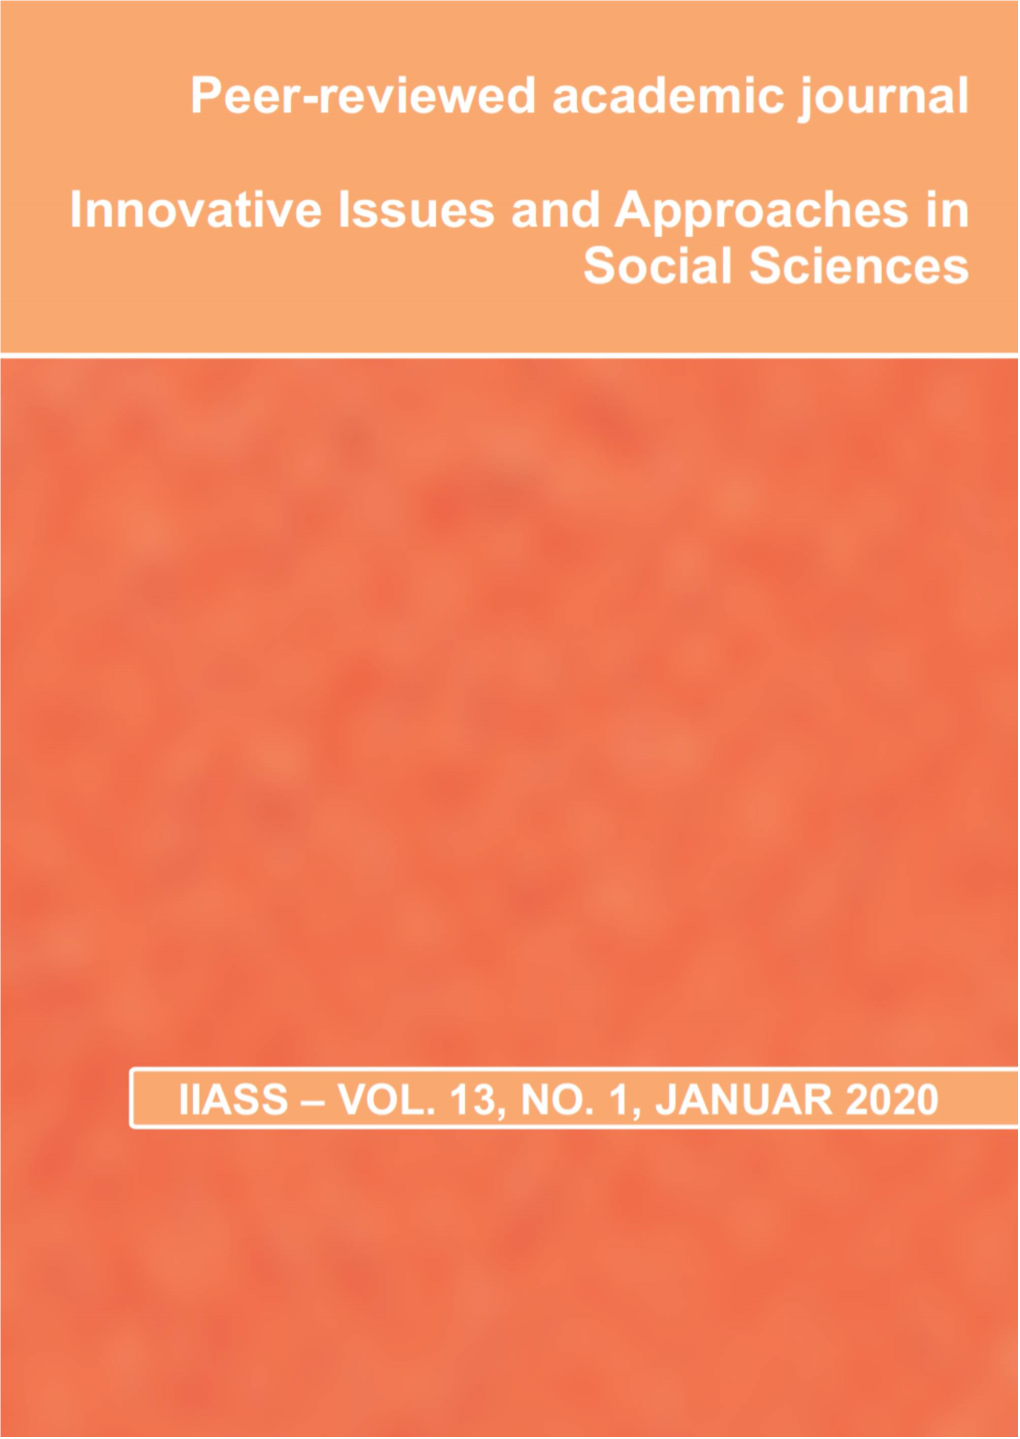 Innovative Issues and Approaches in Social Sciences, Vol. 13, No. 1